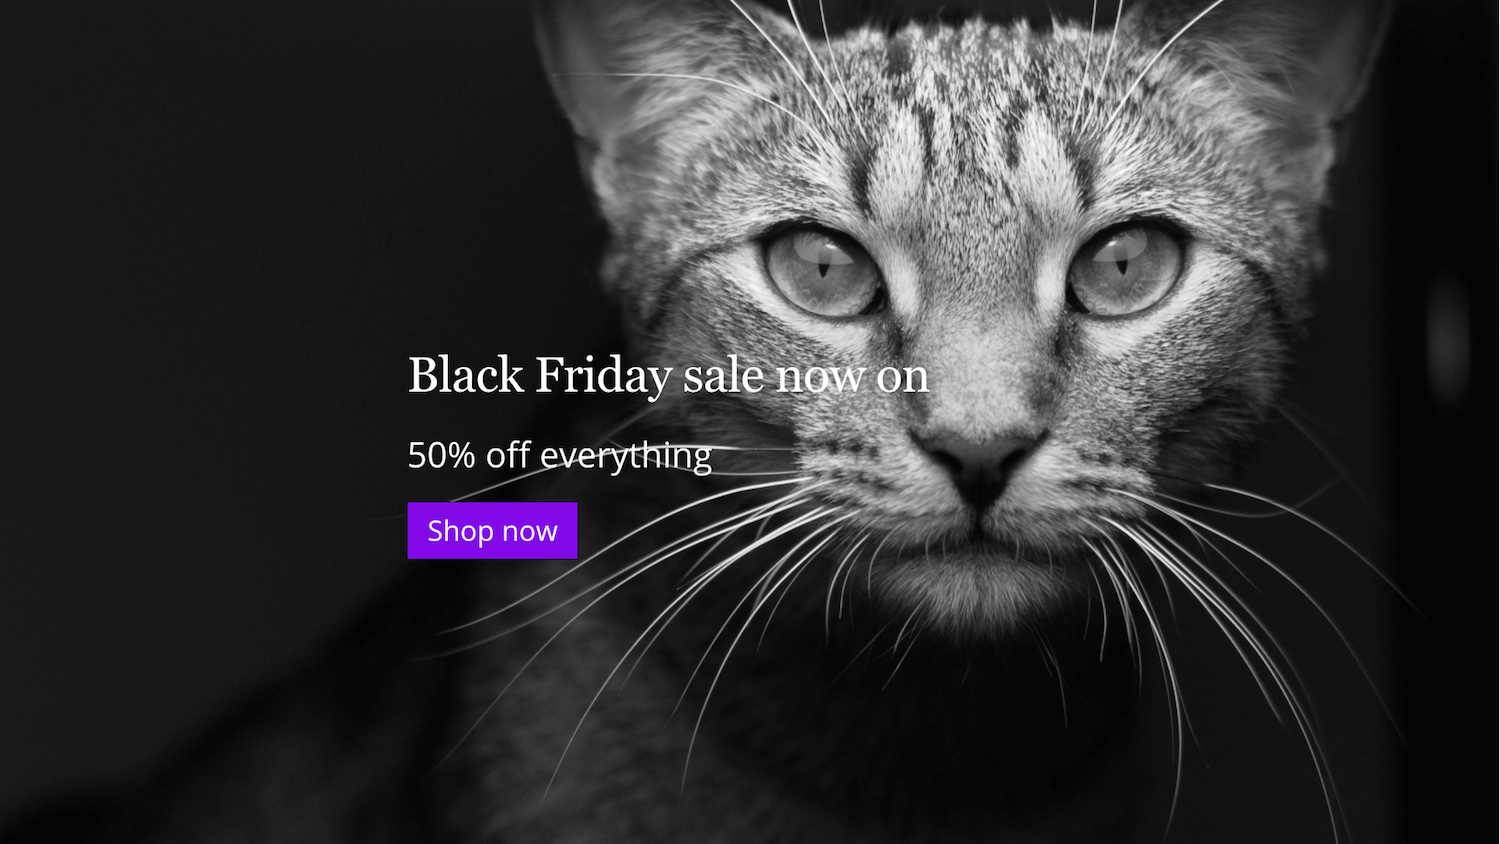 How to create a Black Friday Splash page in just 1 minute using Pootle Pagebuilder Pro